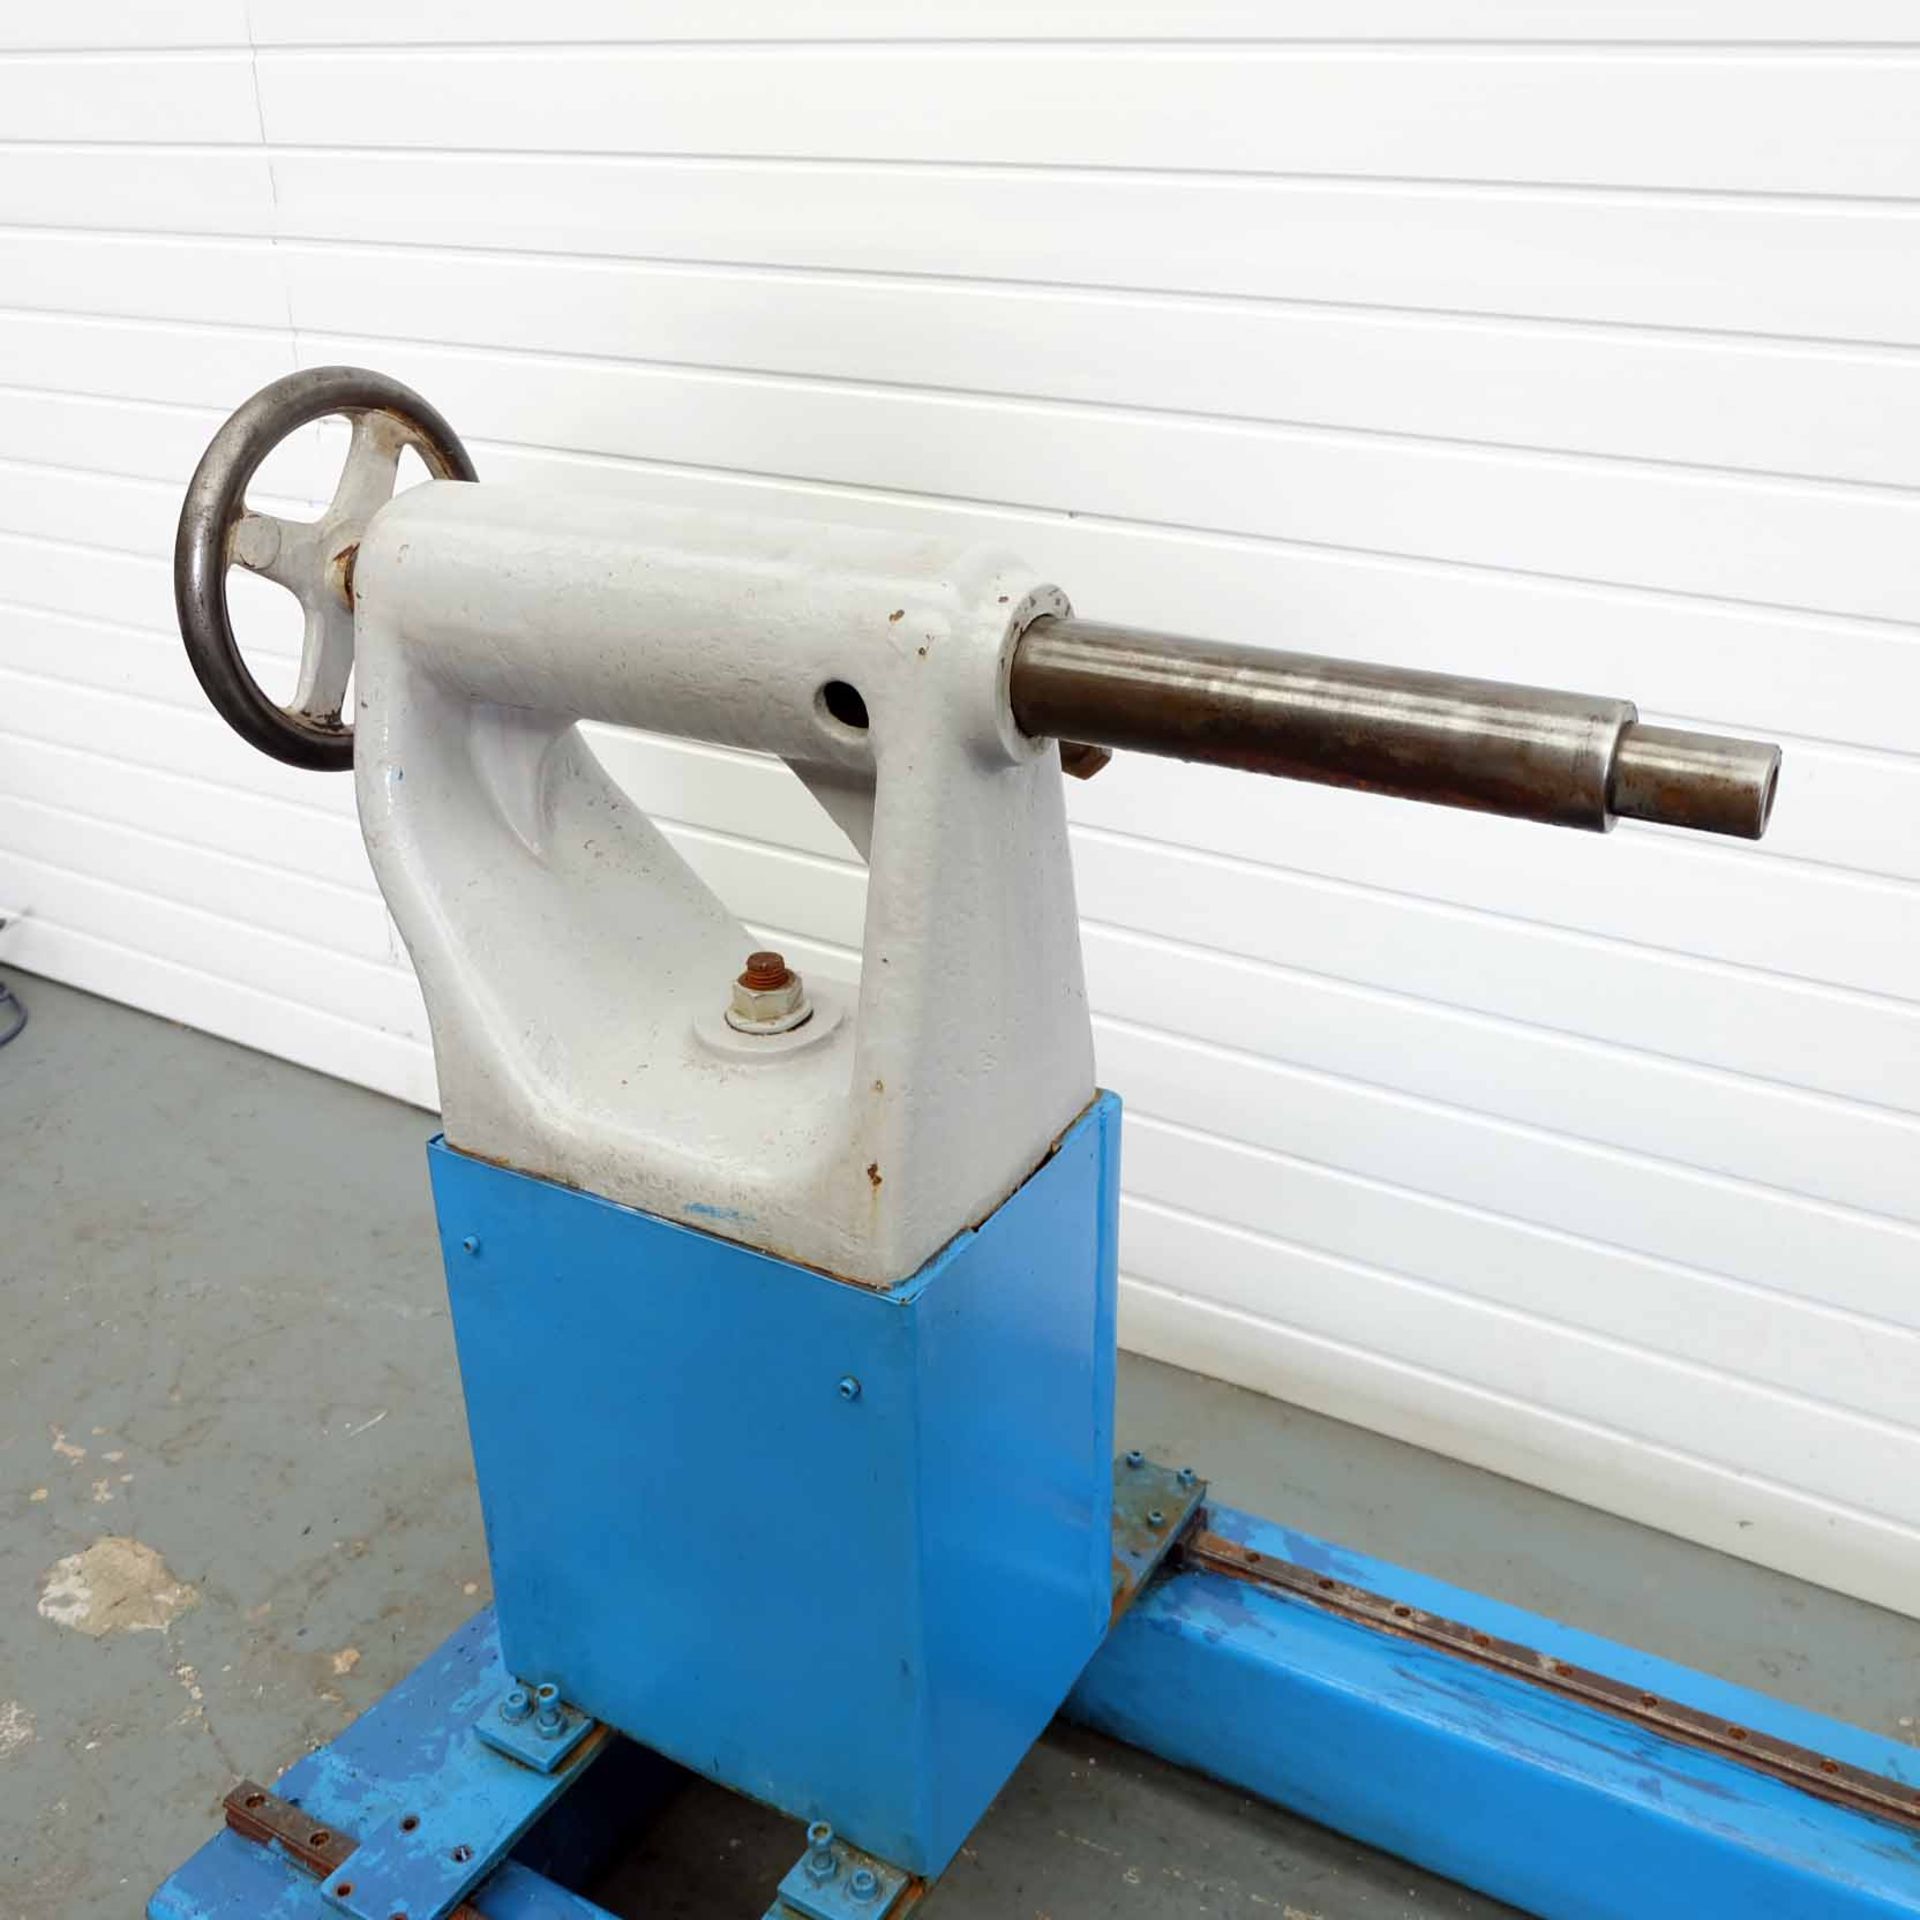 Frost Swaging Machine. Throat Depth 36" Approx. With Tailstock. Motor 3 Phase, 1 HP. - Image 8 of 10